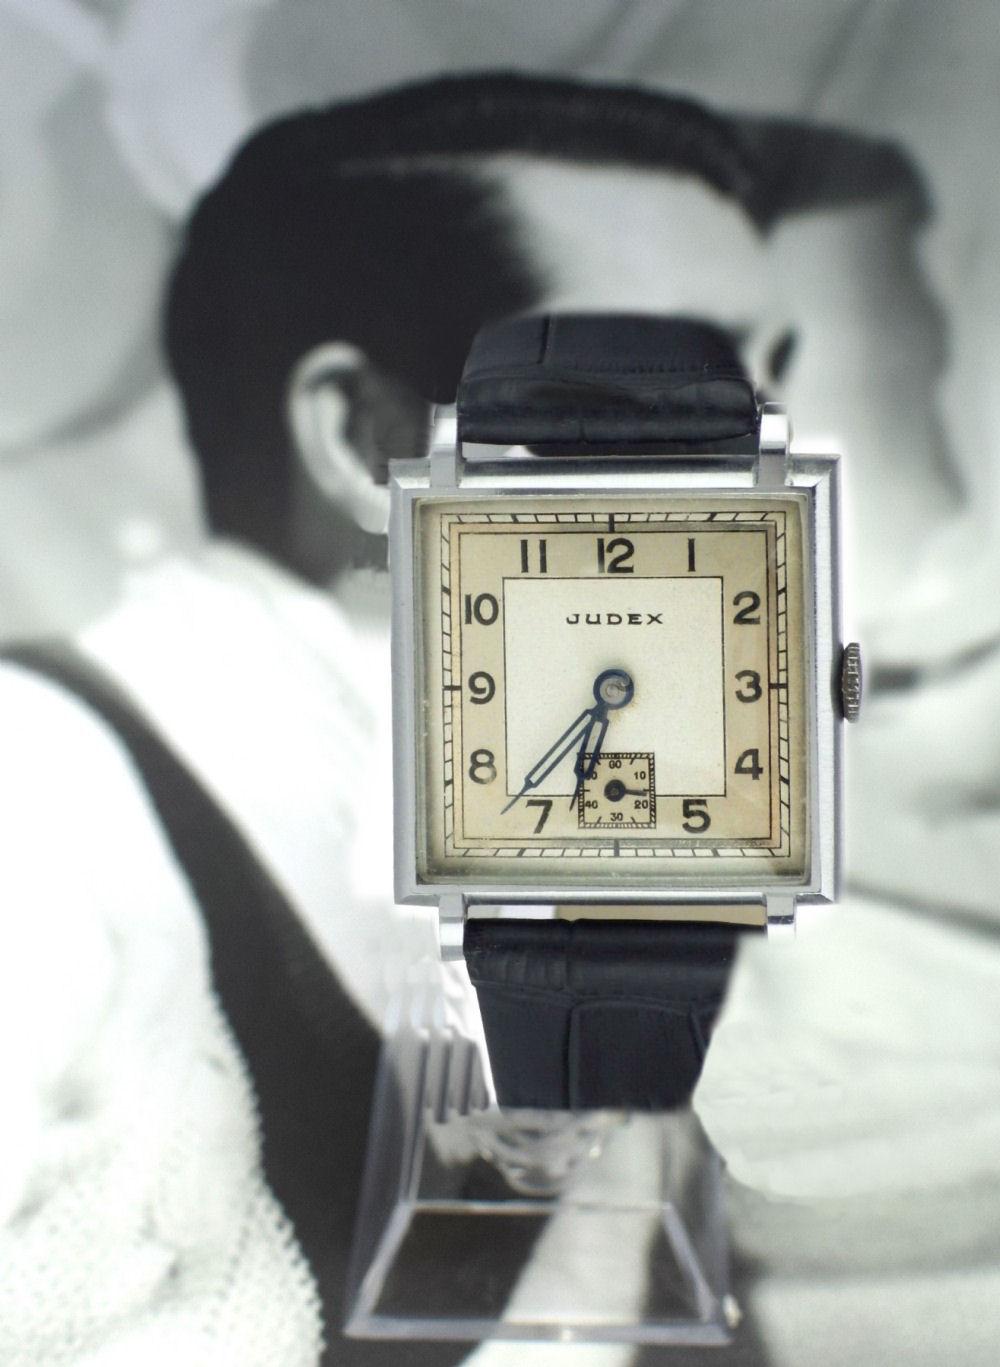 Recently serviced and keeping good time is this superb Art Deco gents manual wrist watch by the French watch makers company Judex. The watch casing is in great condition, free from engravings, tarnishing or erosion. The case dimensions: approx. 27.7